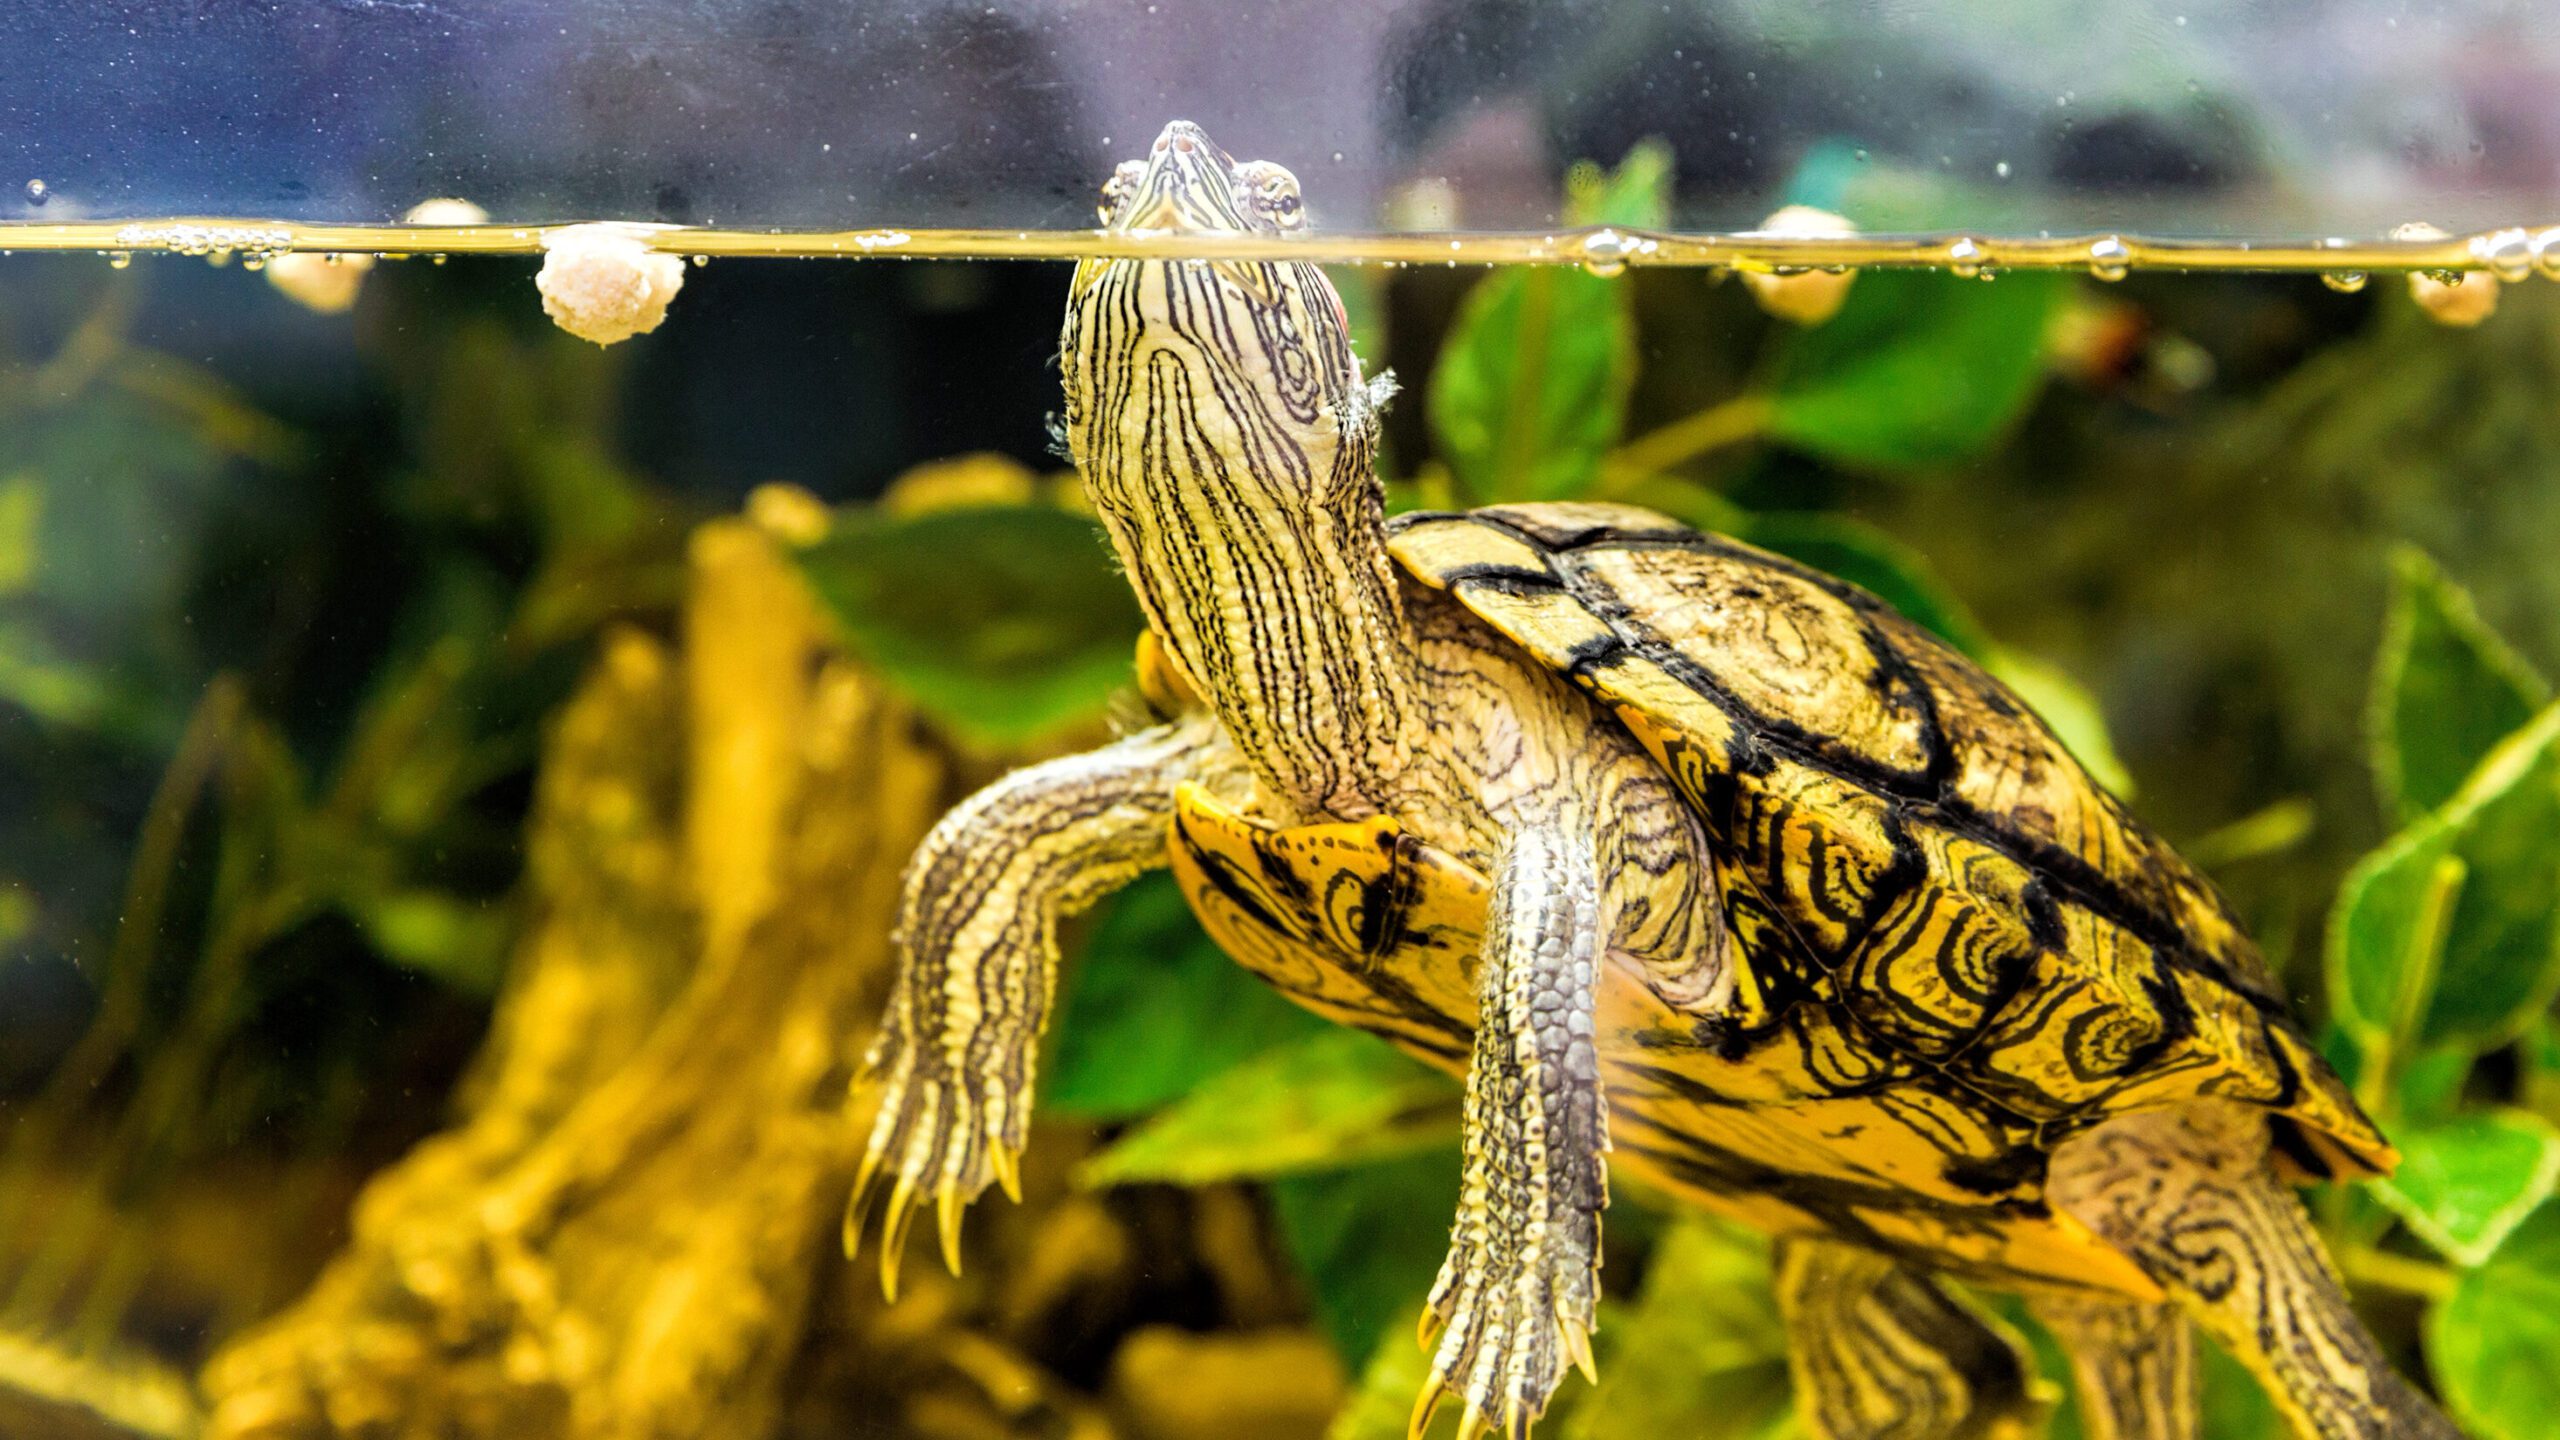 It's important to keep your turtle enclosure clean and free of debris or waste